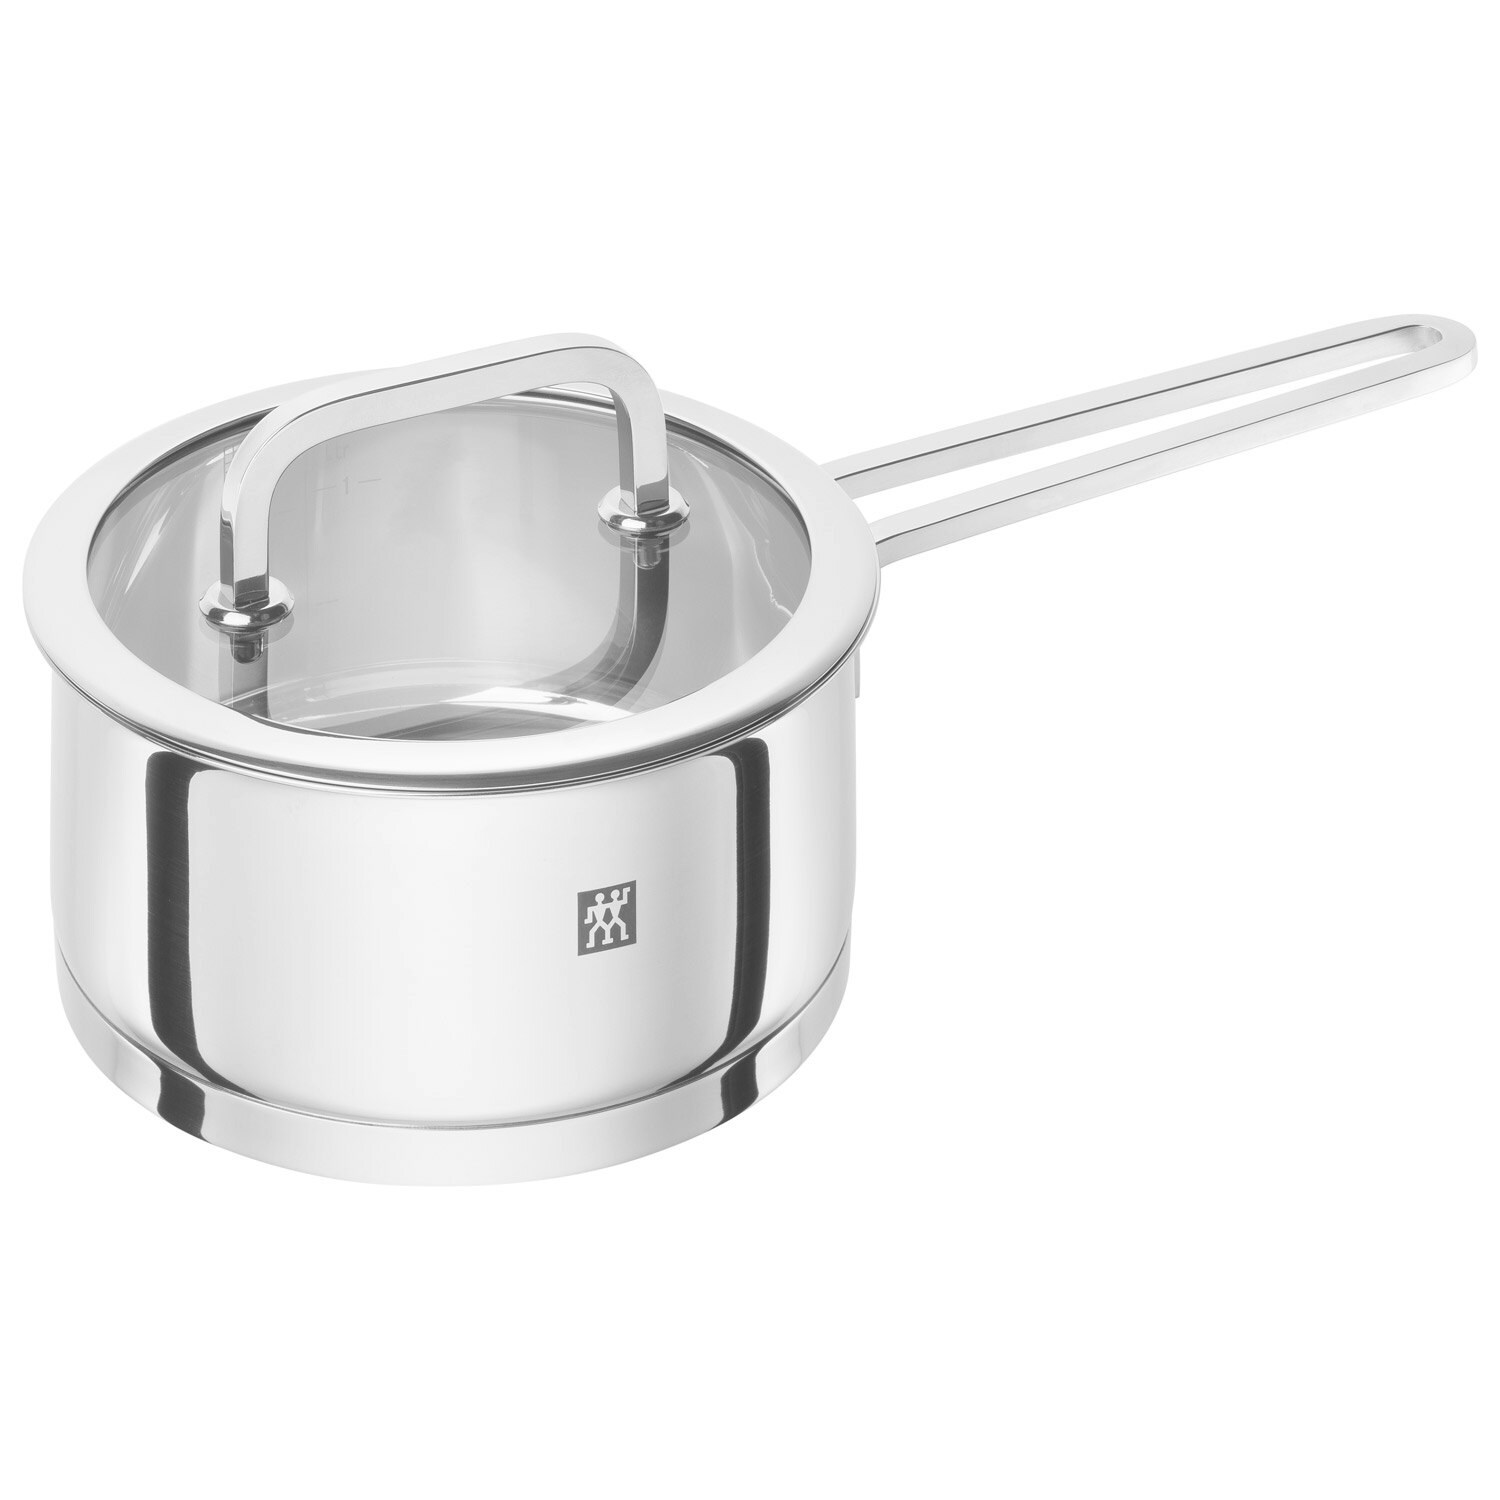 https://royaldesign.com/image/2/zwilling-moment-s-saucepan-with-glass-lid-15-l-16x75-cm-0